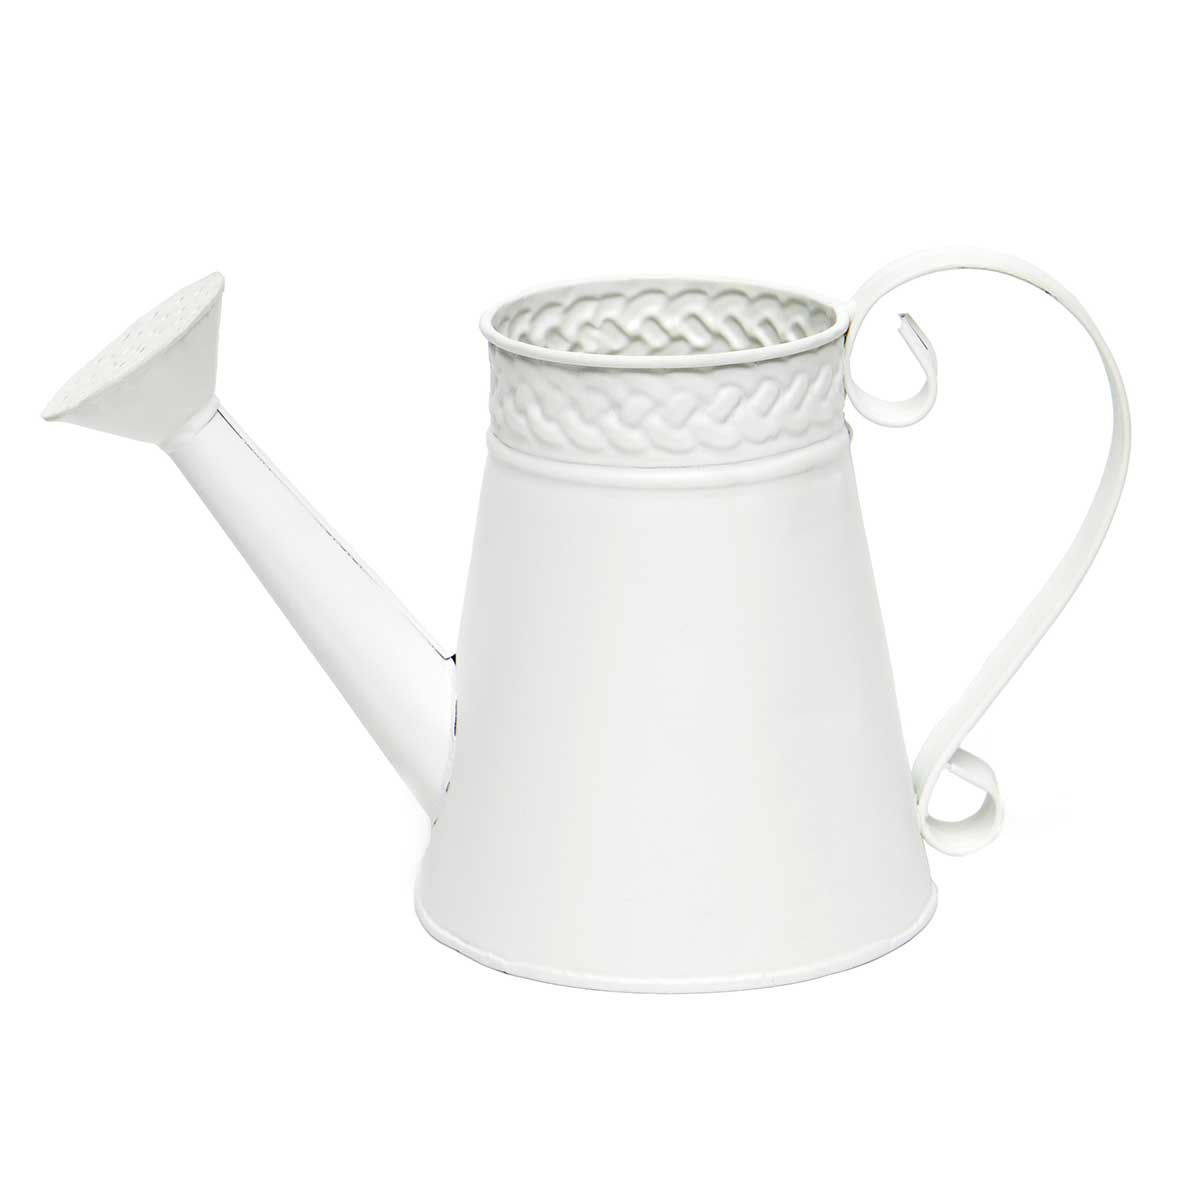 Veranda Watering Can with Scroll Handle Matte White